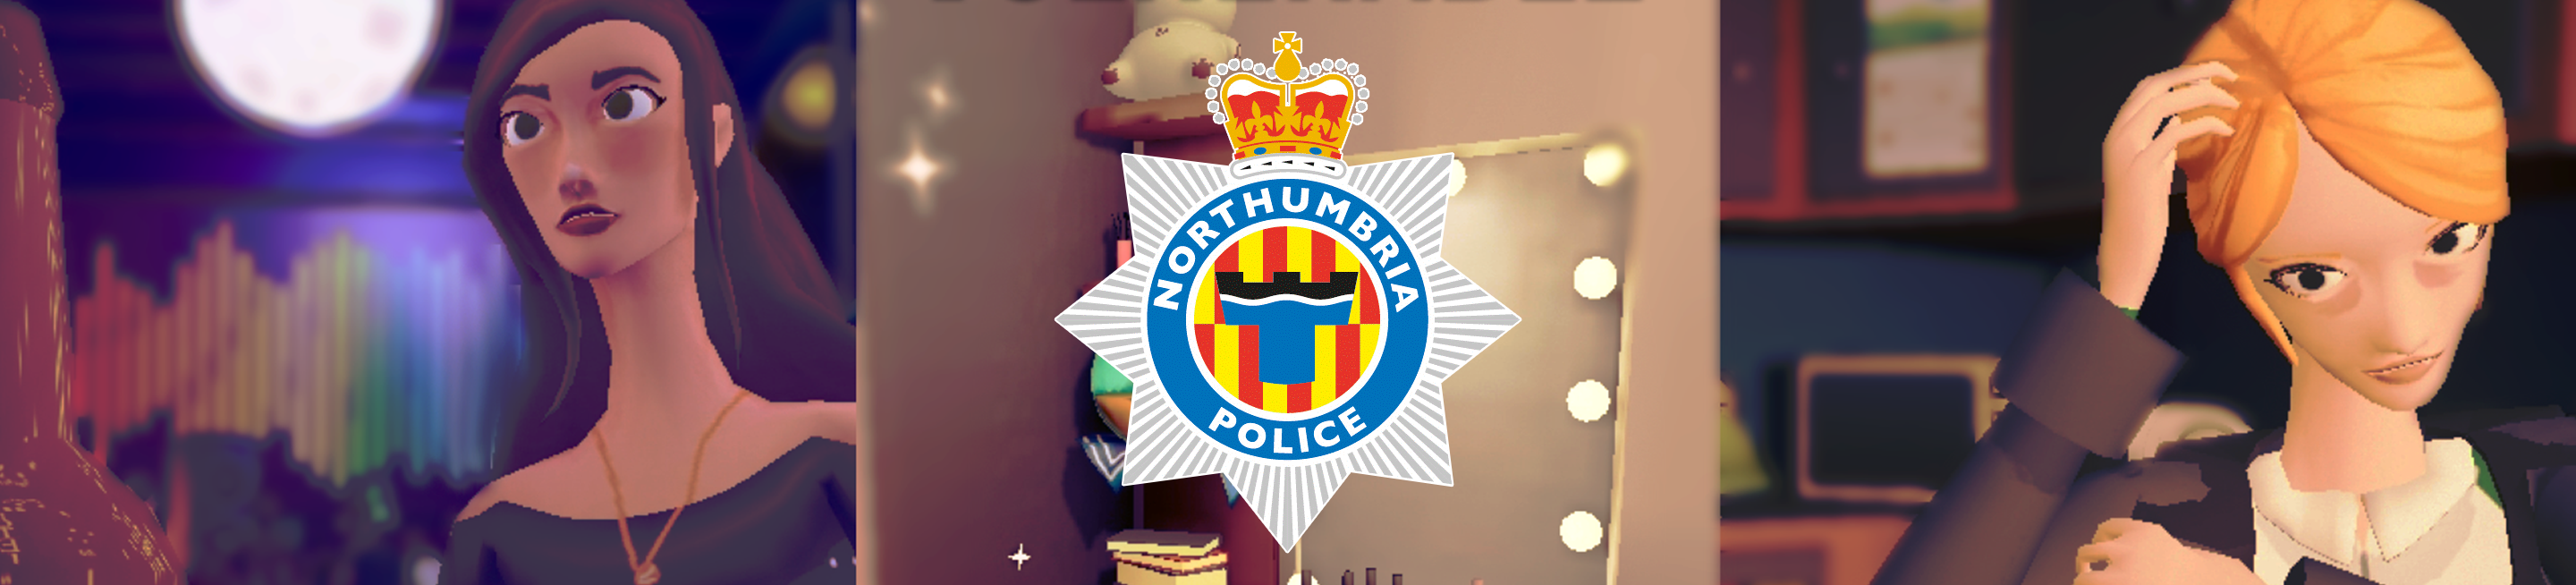 Northumbria Police Banner